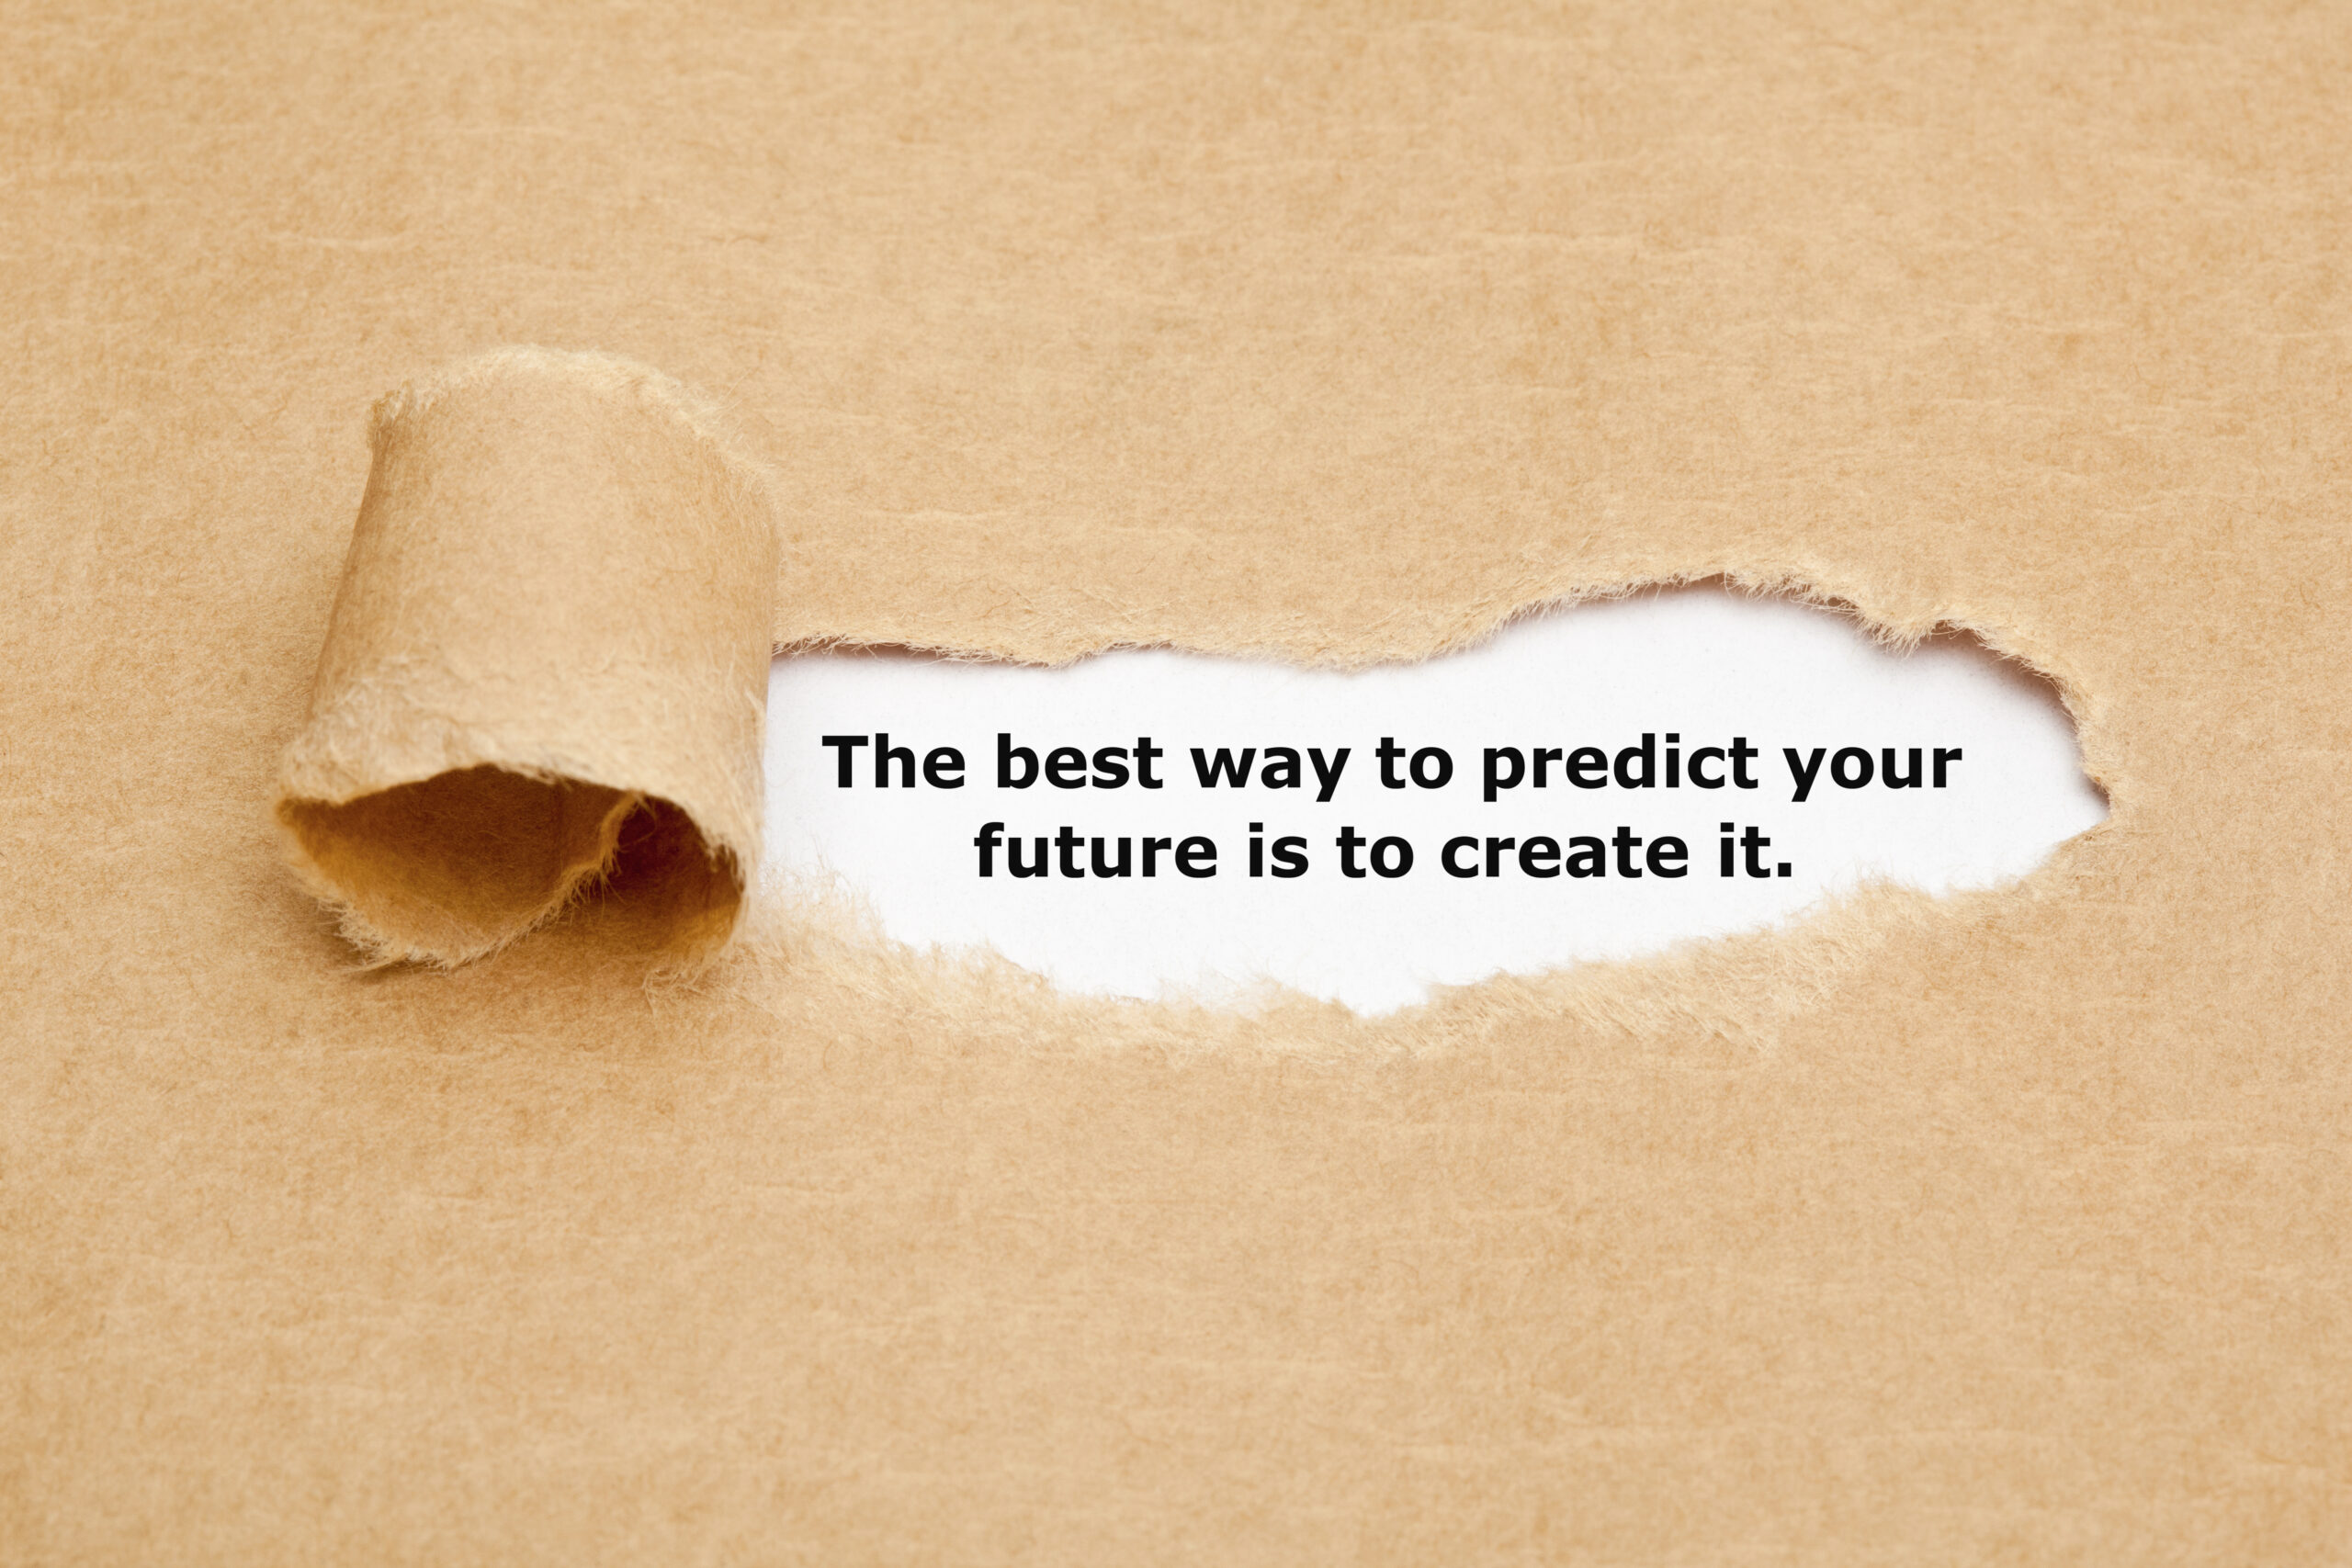 The-best-way-to-predict-your-future-is-to-create-it-torn-paper